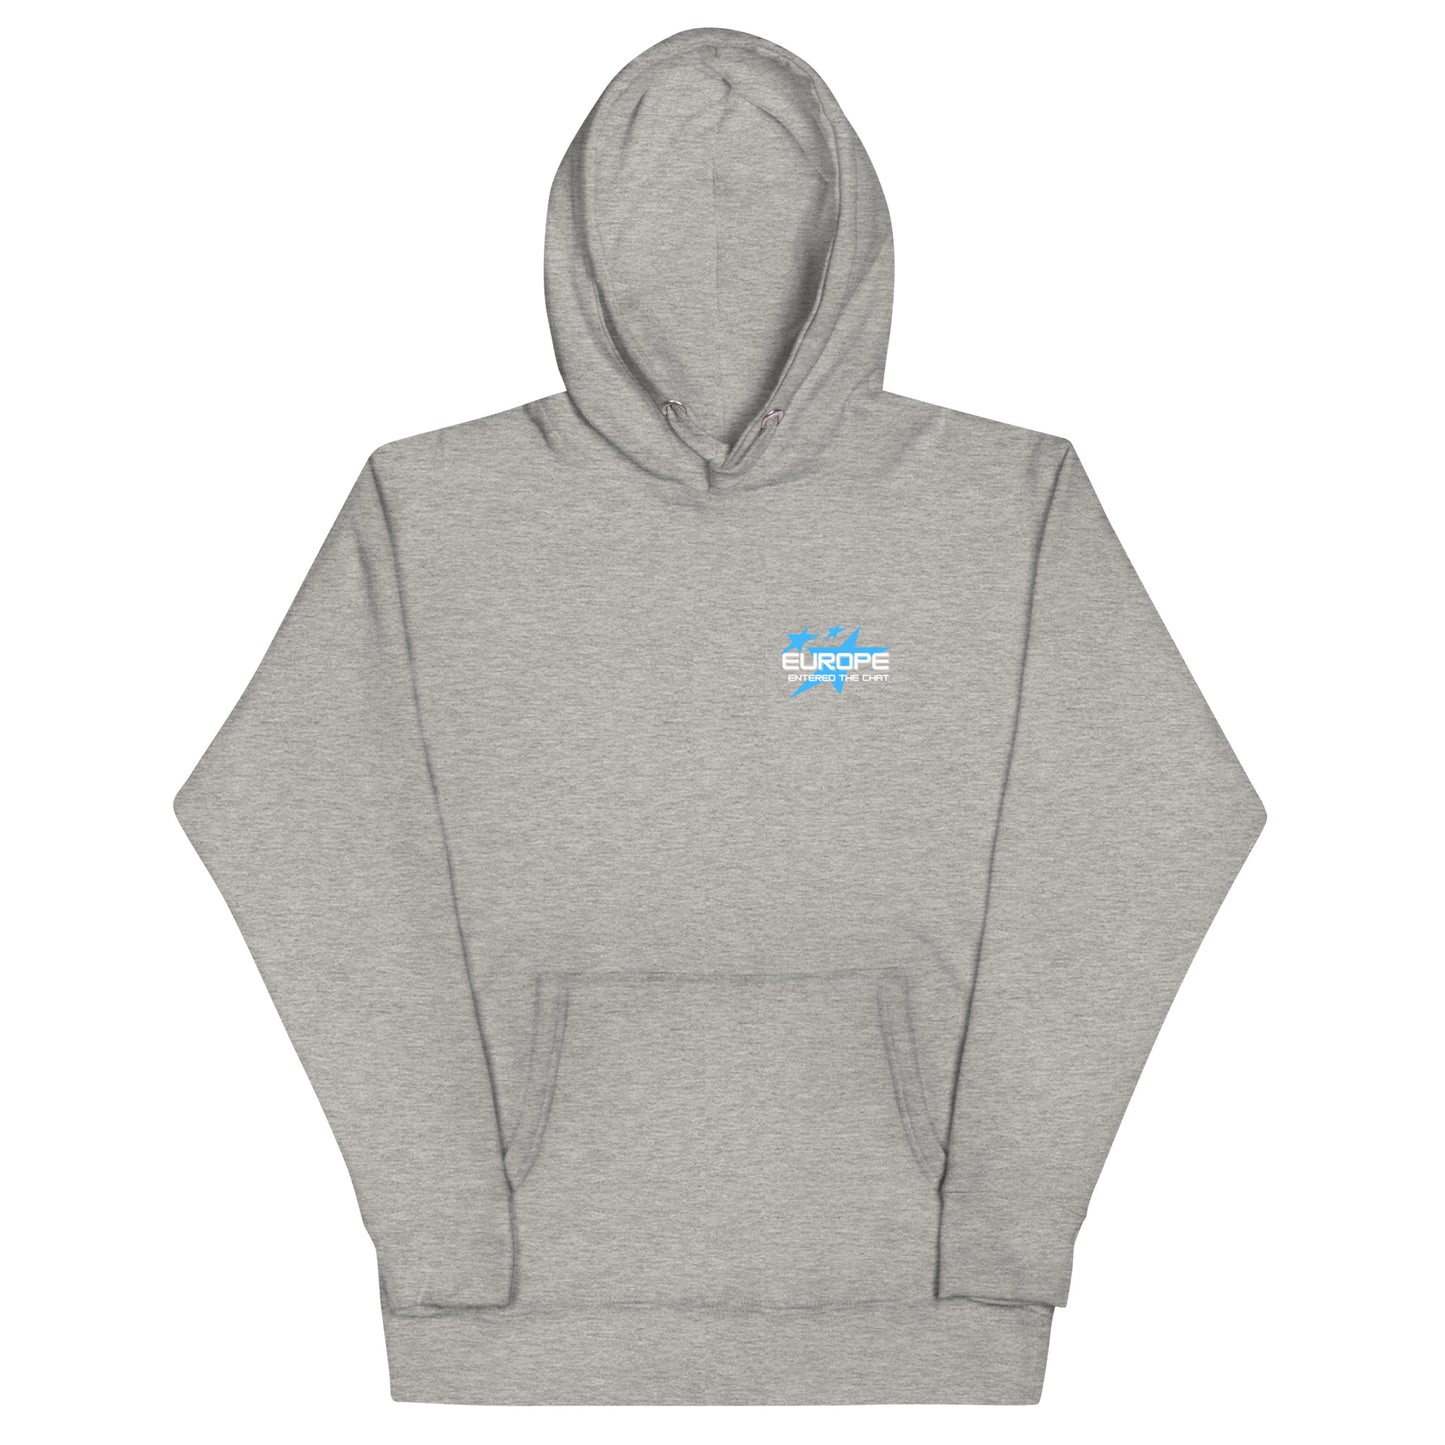 Europe Entered the Chat Unisex Hoodie